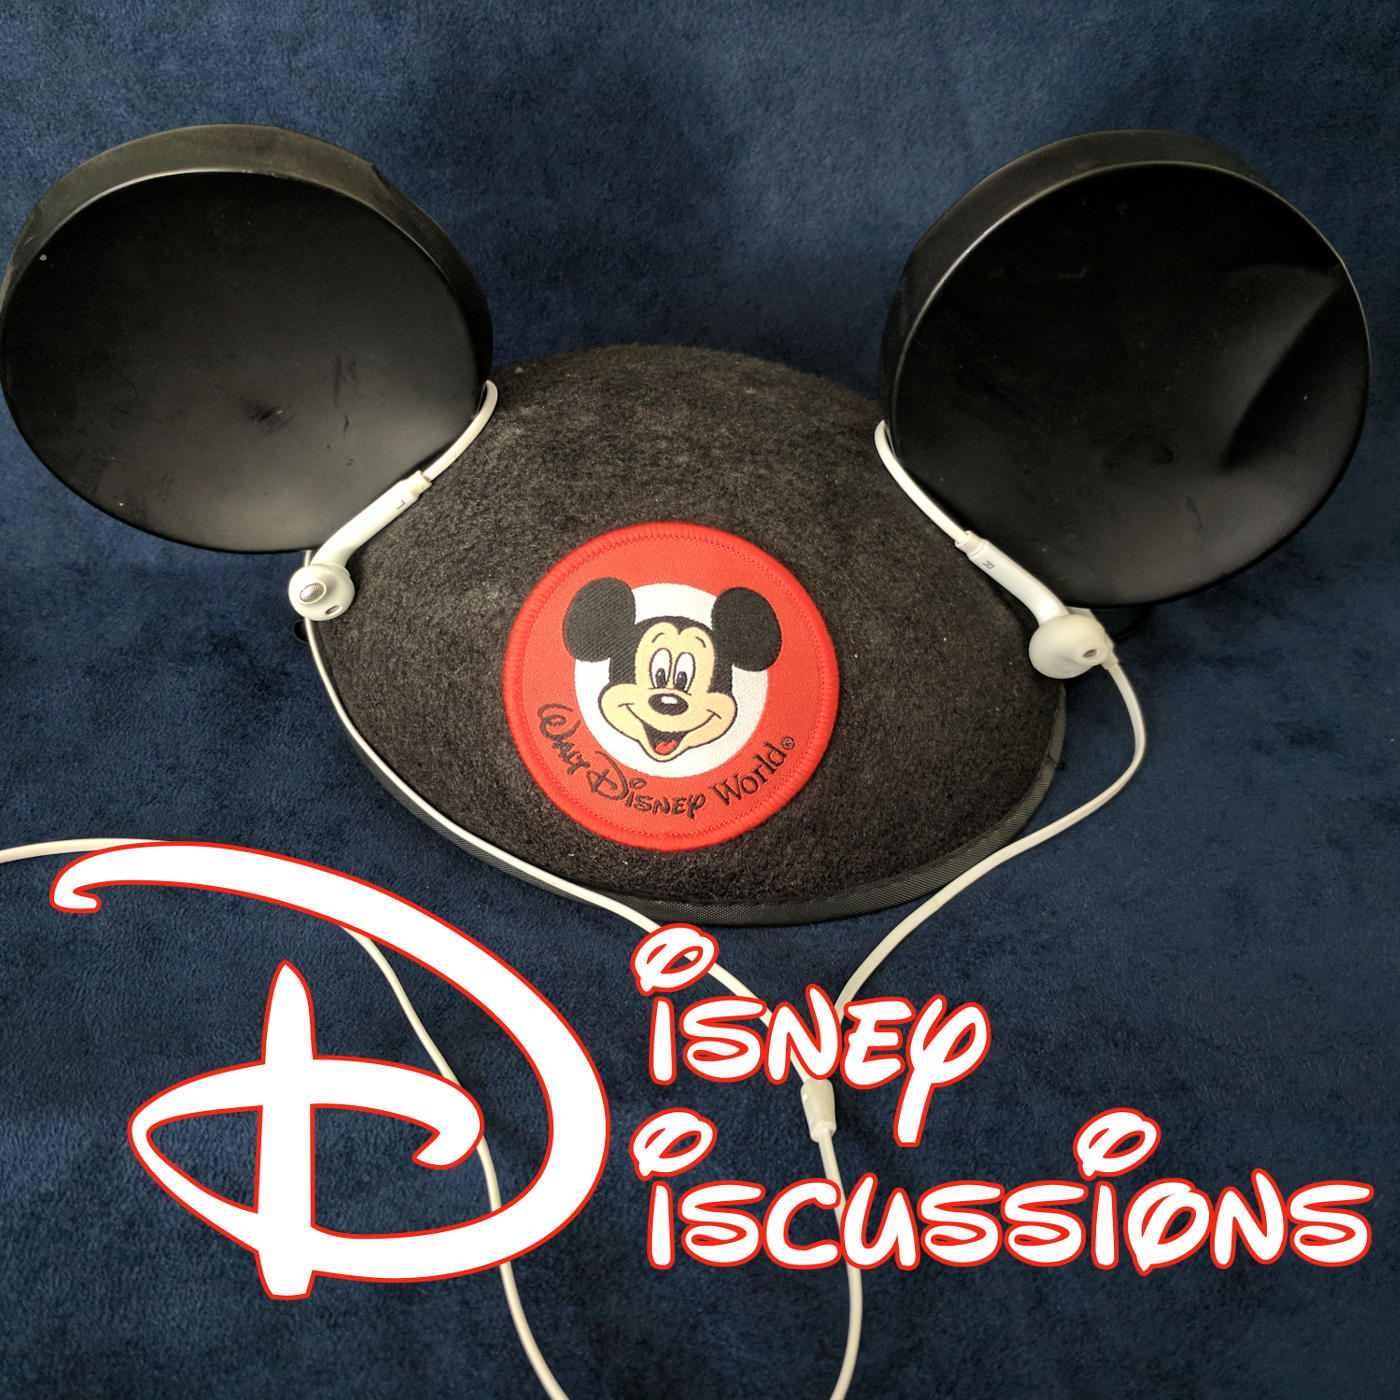 Epcot turns 35, Star Wars Rebels, Big Hero 6 series and Disney’s 2018 & 2019 movies - Disney Discussions Episode 5